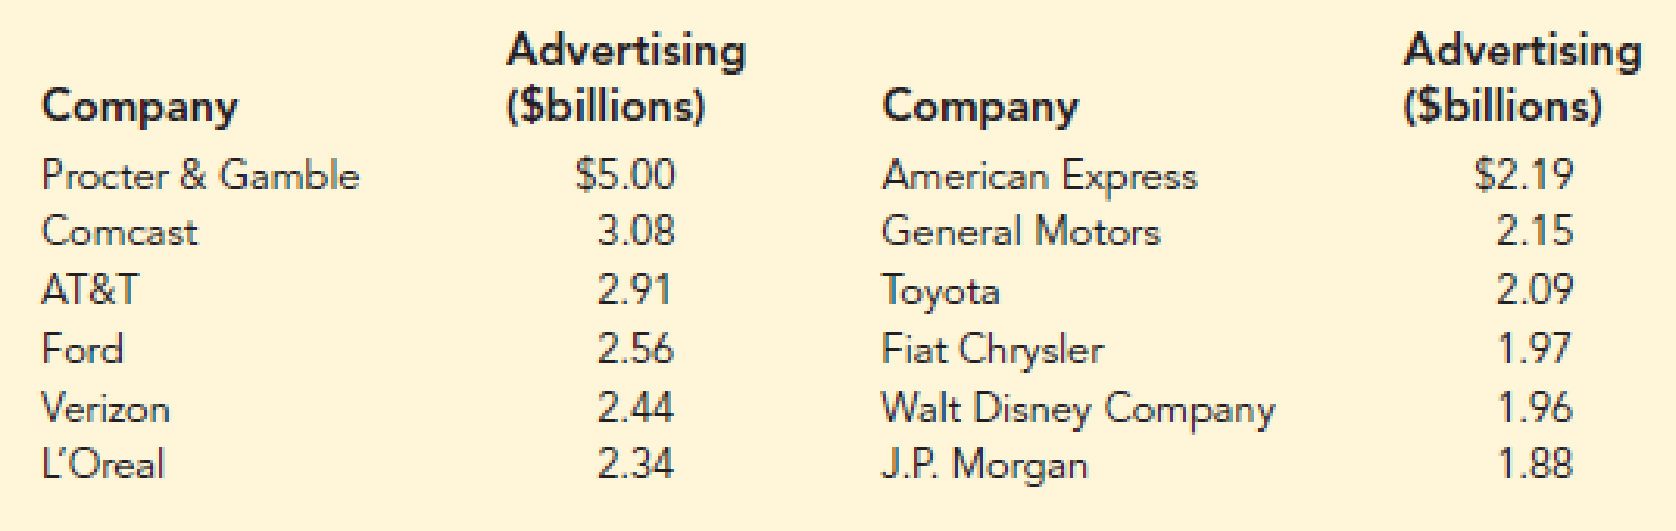 Chapter 3.1, Problem 9E, Advertising Spending. Which companies spend the most money on advertising? Business Insider 